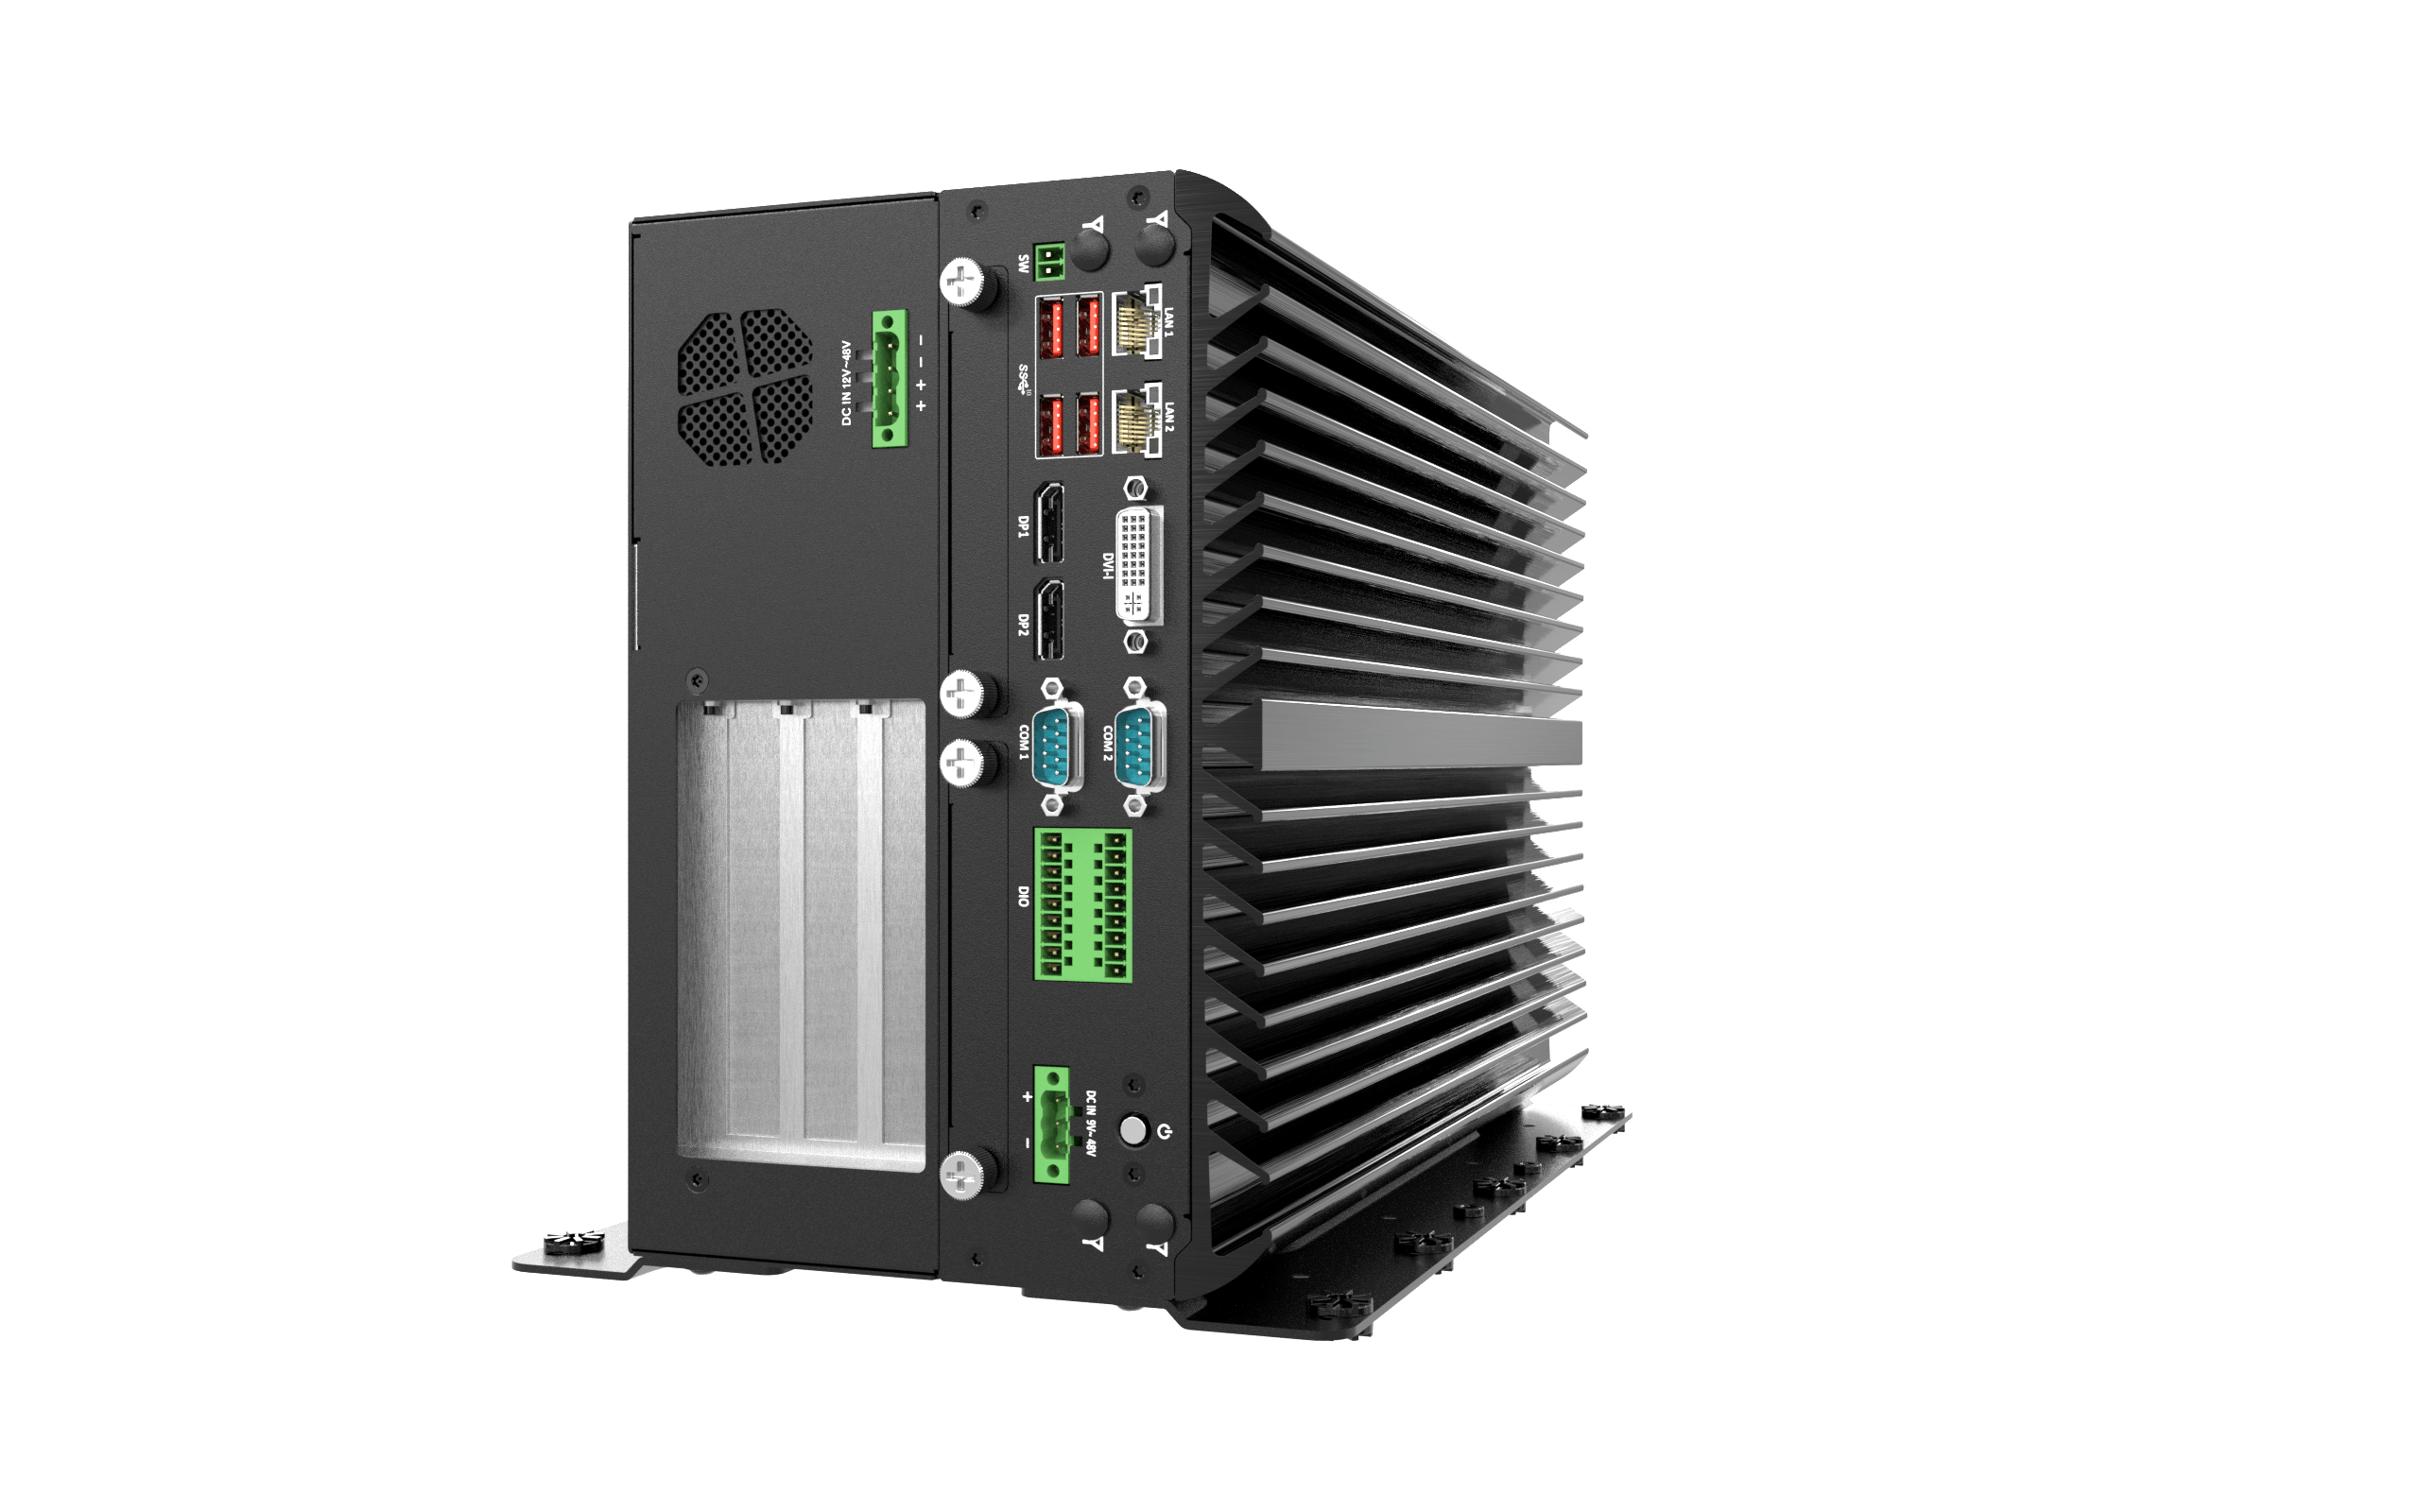 VCO-6000-CFL-3-2PWR Machine Vision Computer with 9th Gen Intel® Core™ Processor, 3x PCIe Expansion, Dual Power Input